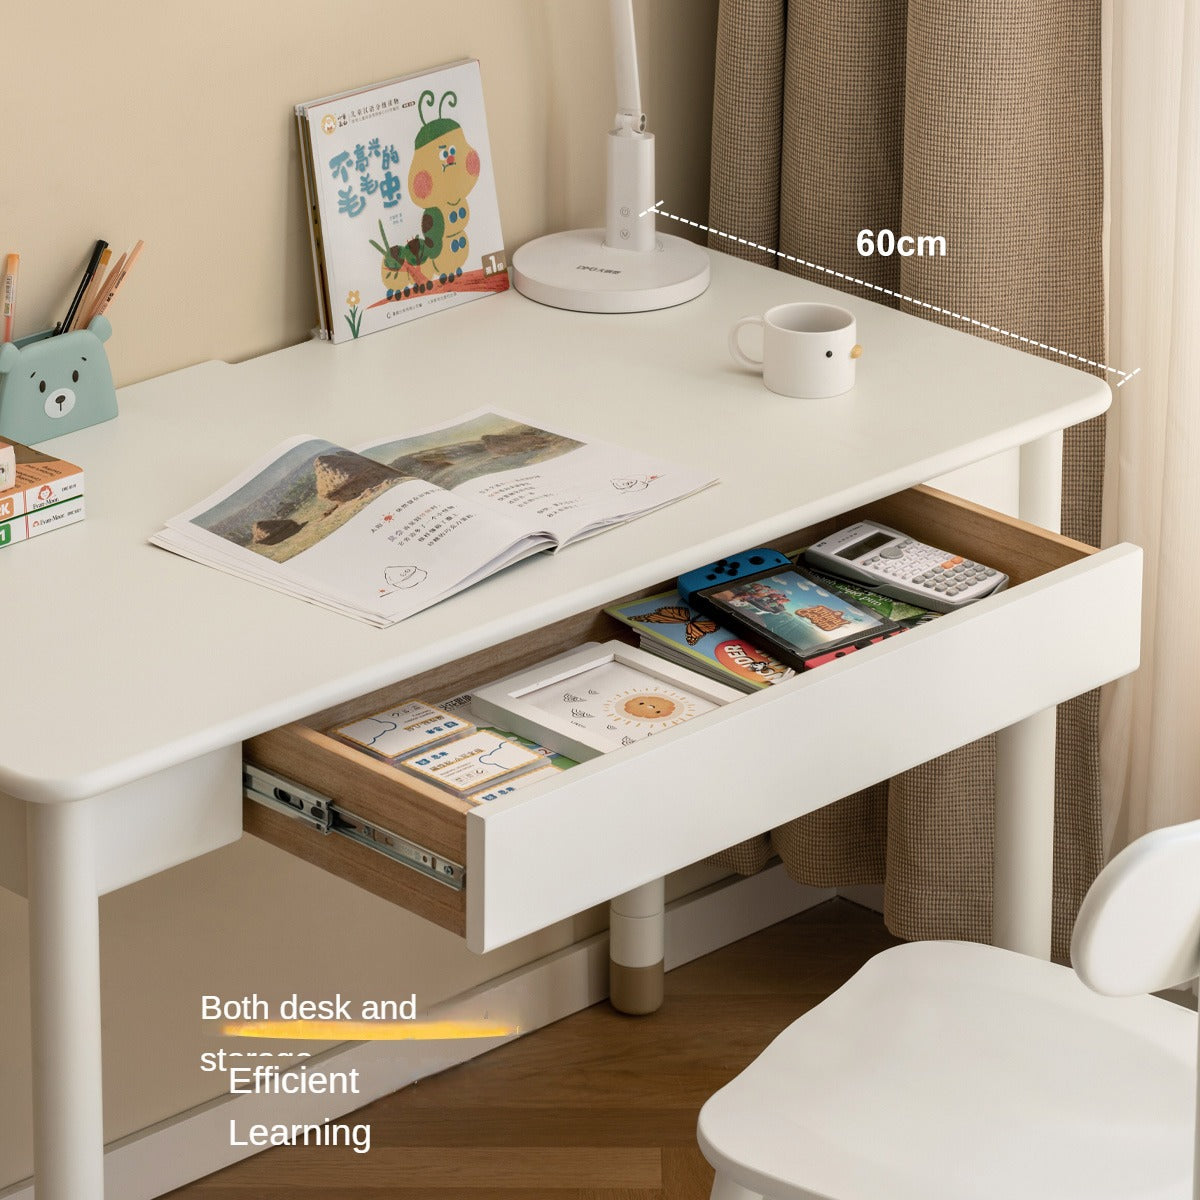 Poplar Solid Wood Children's Elevated Learning Table Cream Drawer Table "